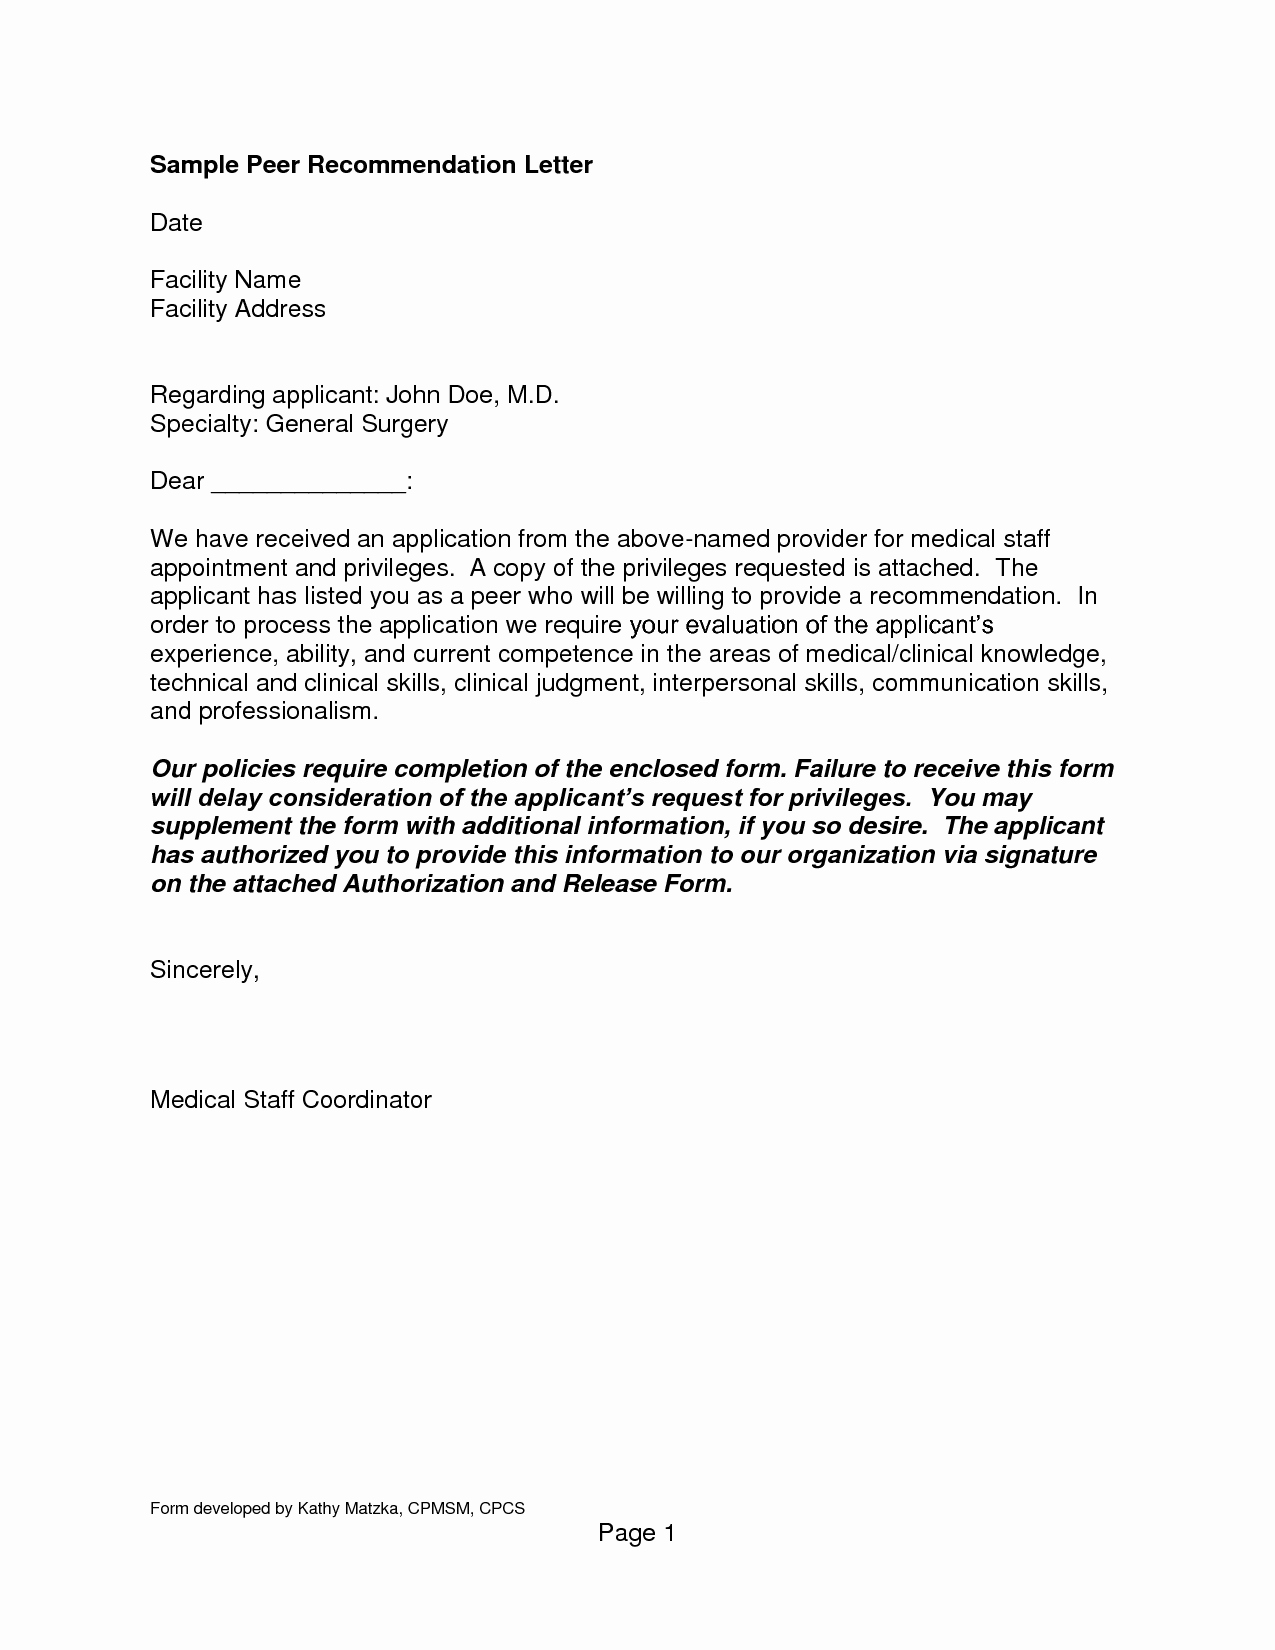 Letters Of Recommendation Template Best Of Reference Letter Template Letter Of Re Mendation format